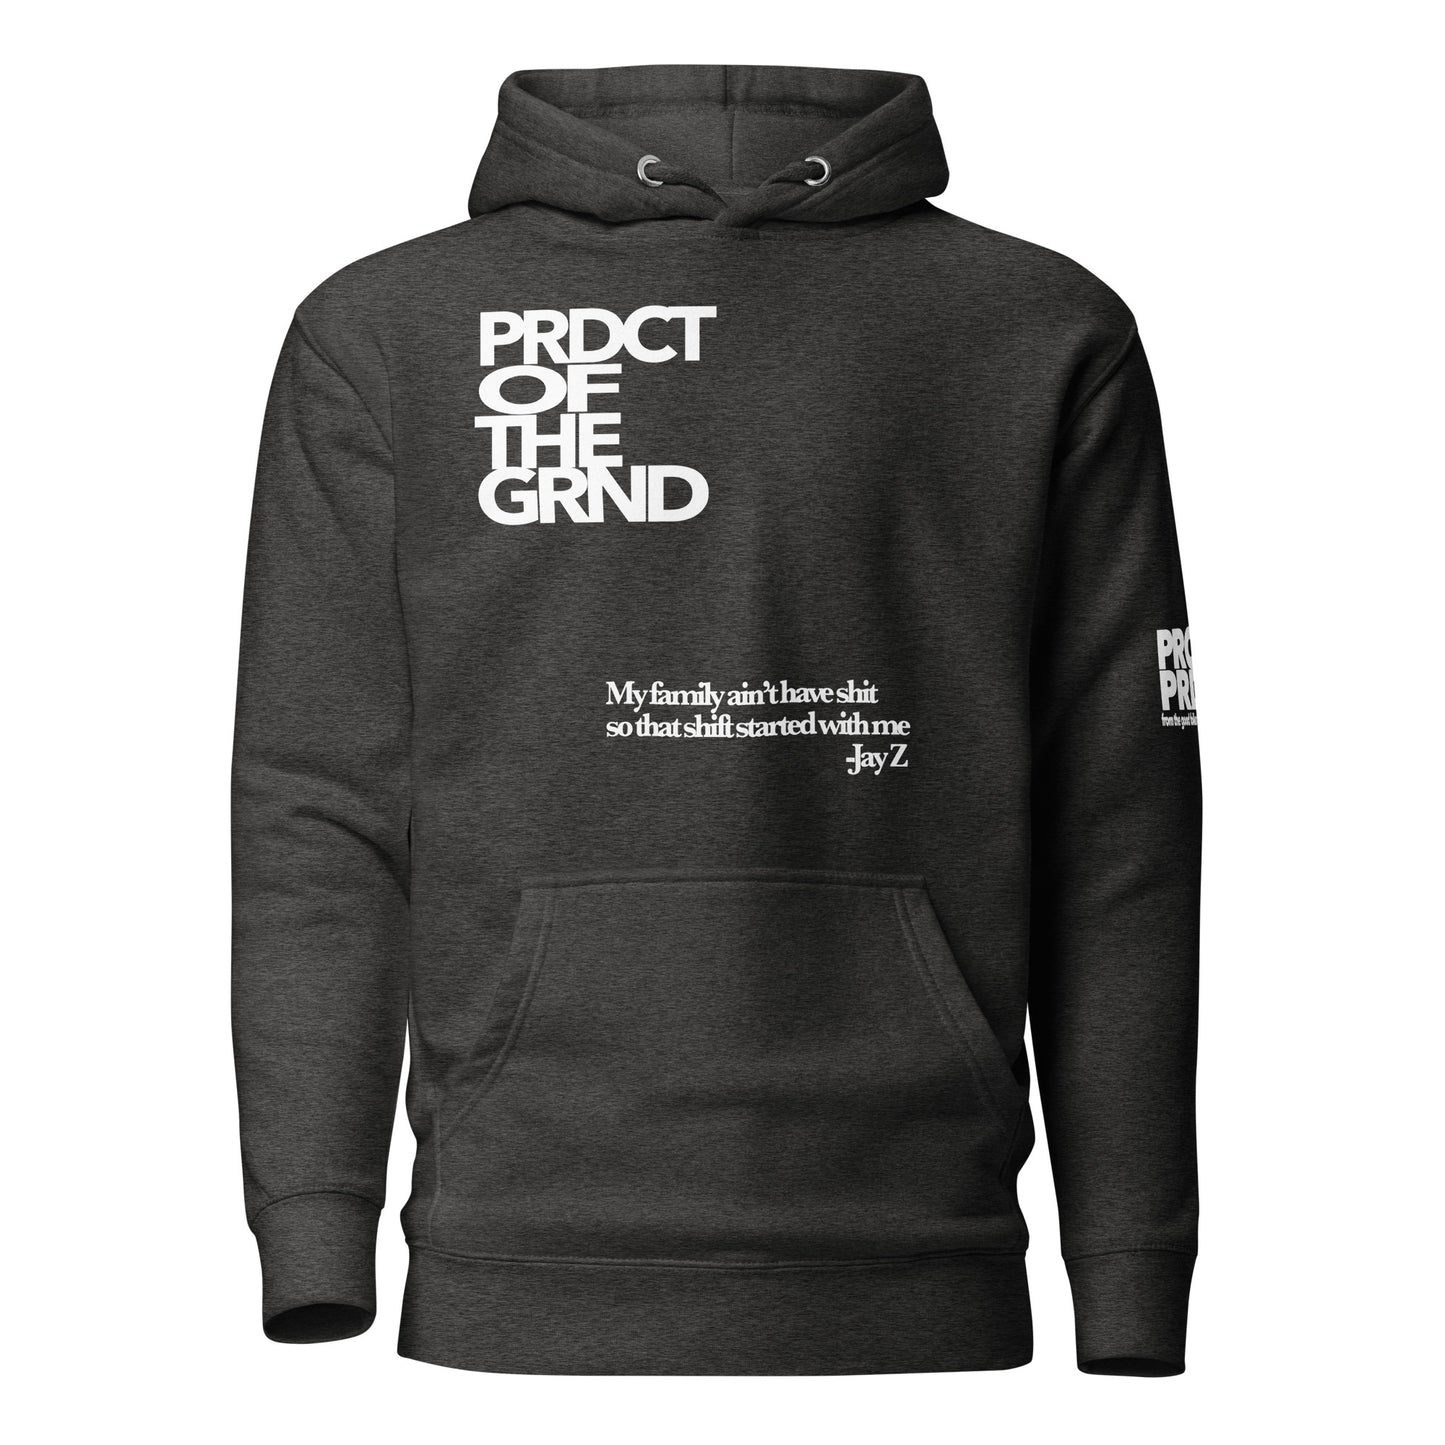 "Product of the Grind" Hoodie